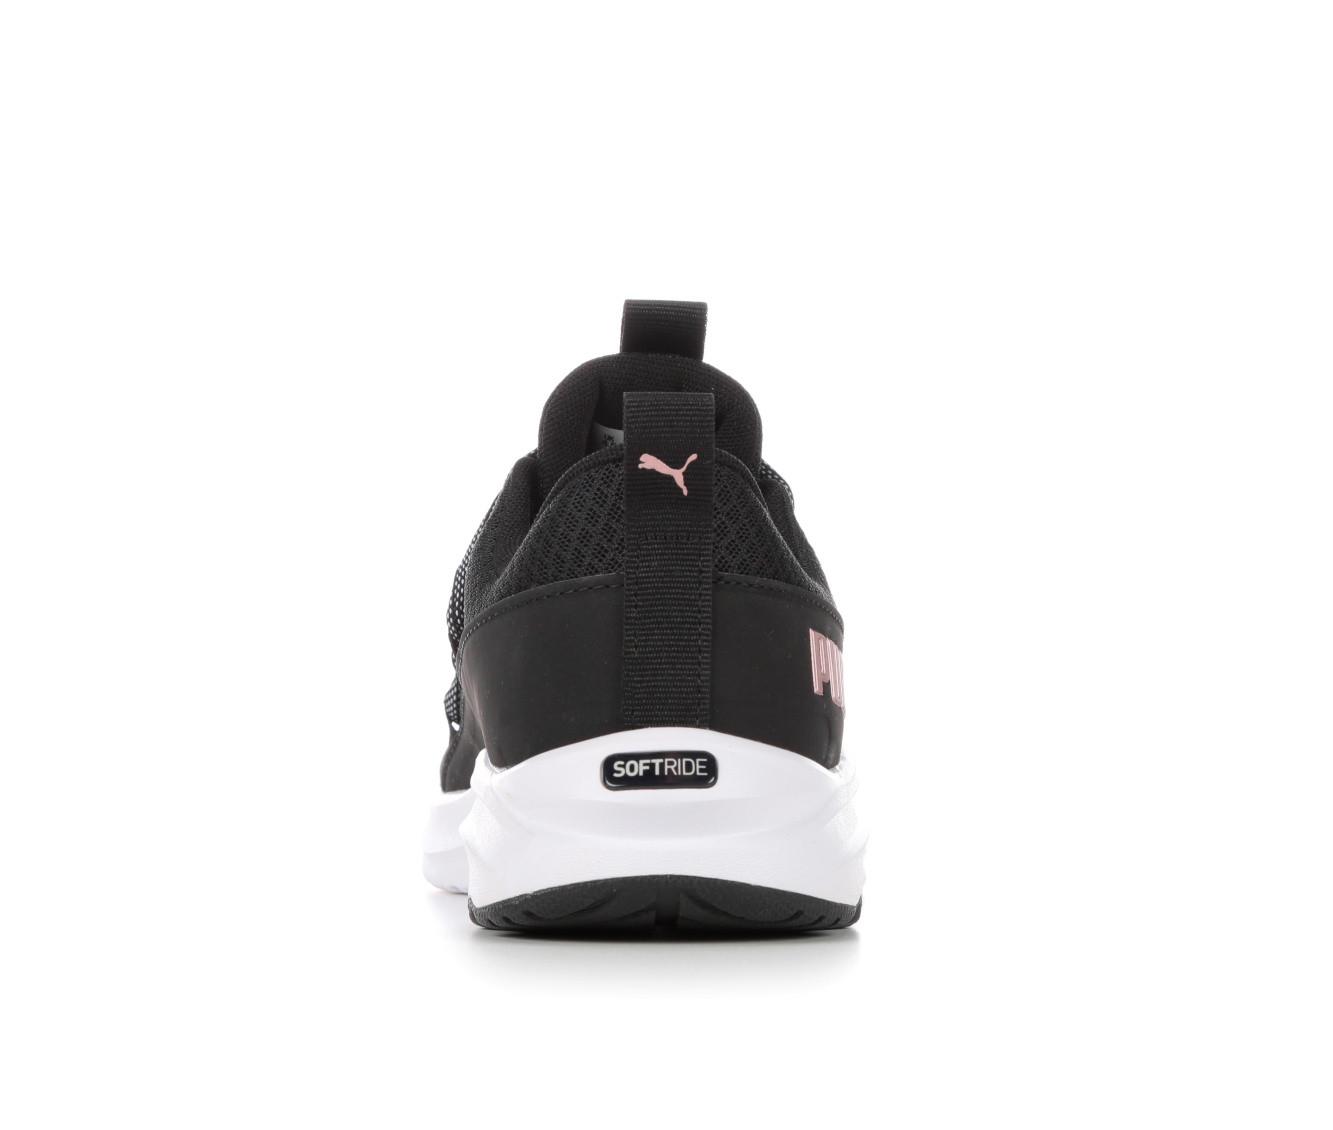 Women's Puma One 4 All Sneakers